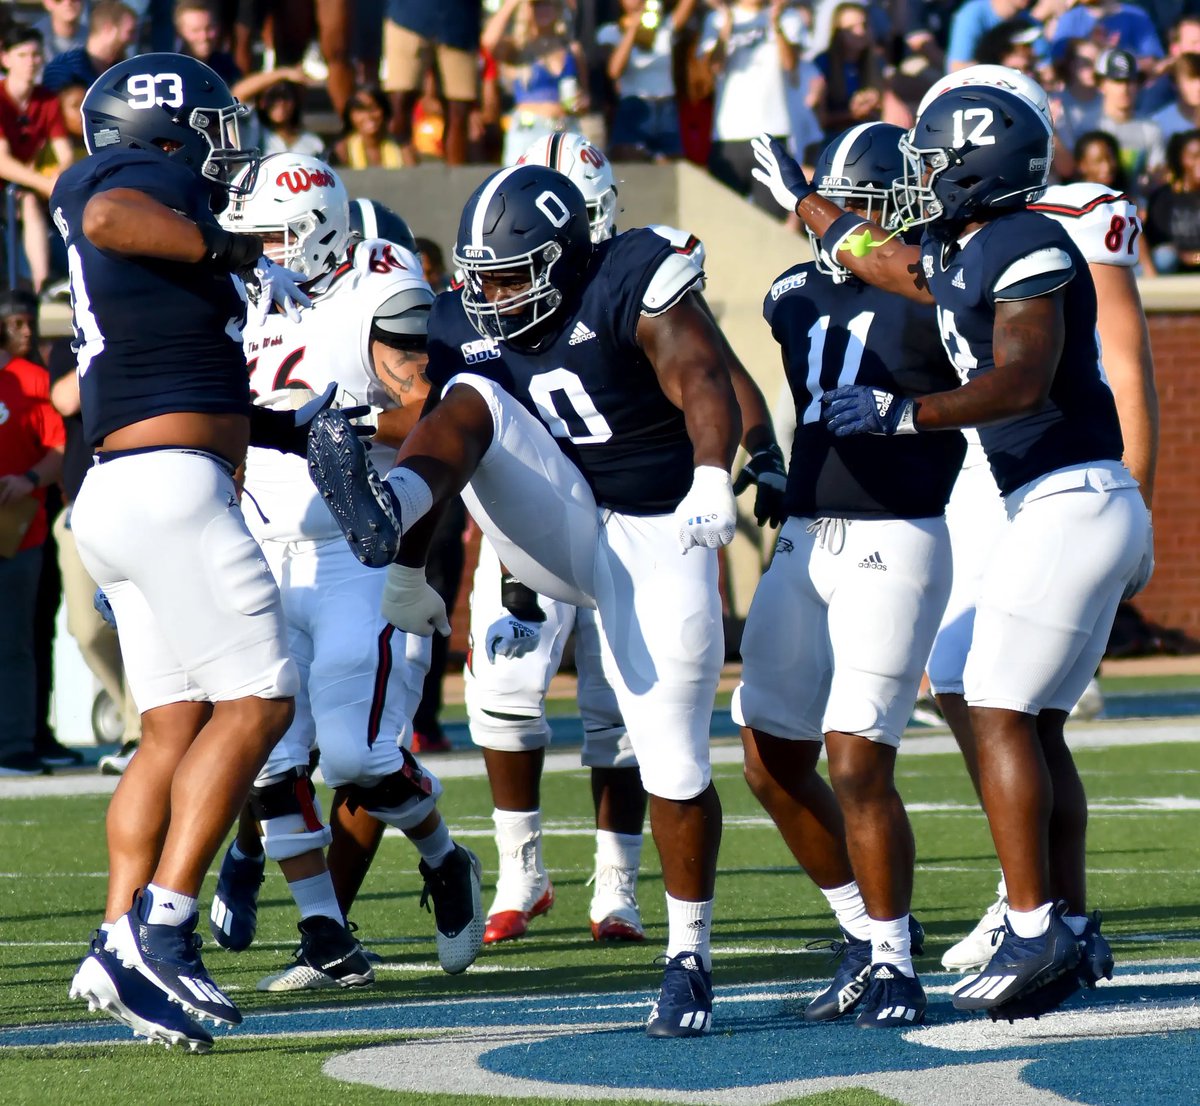 #AGTG Very blessed to receive an offer from Georgia Southern University!